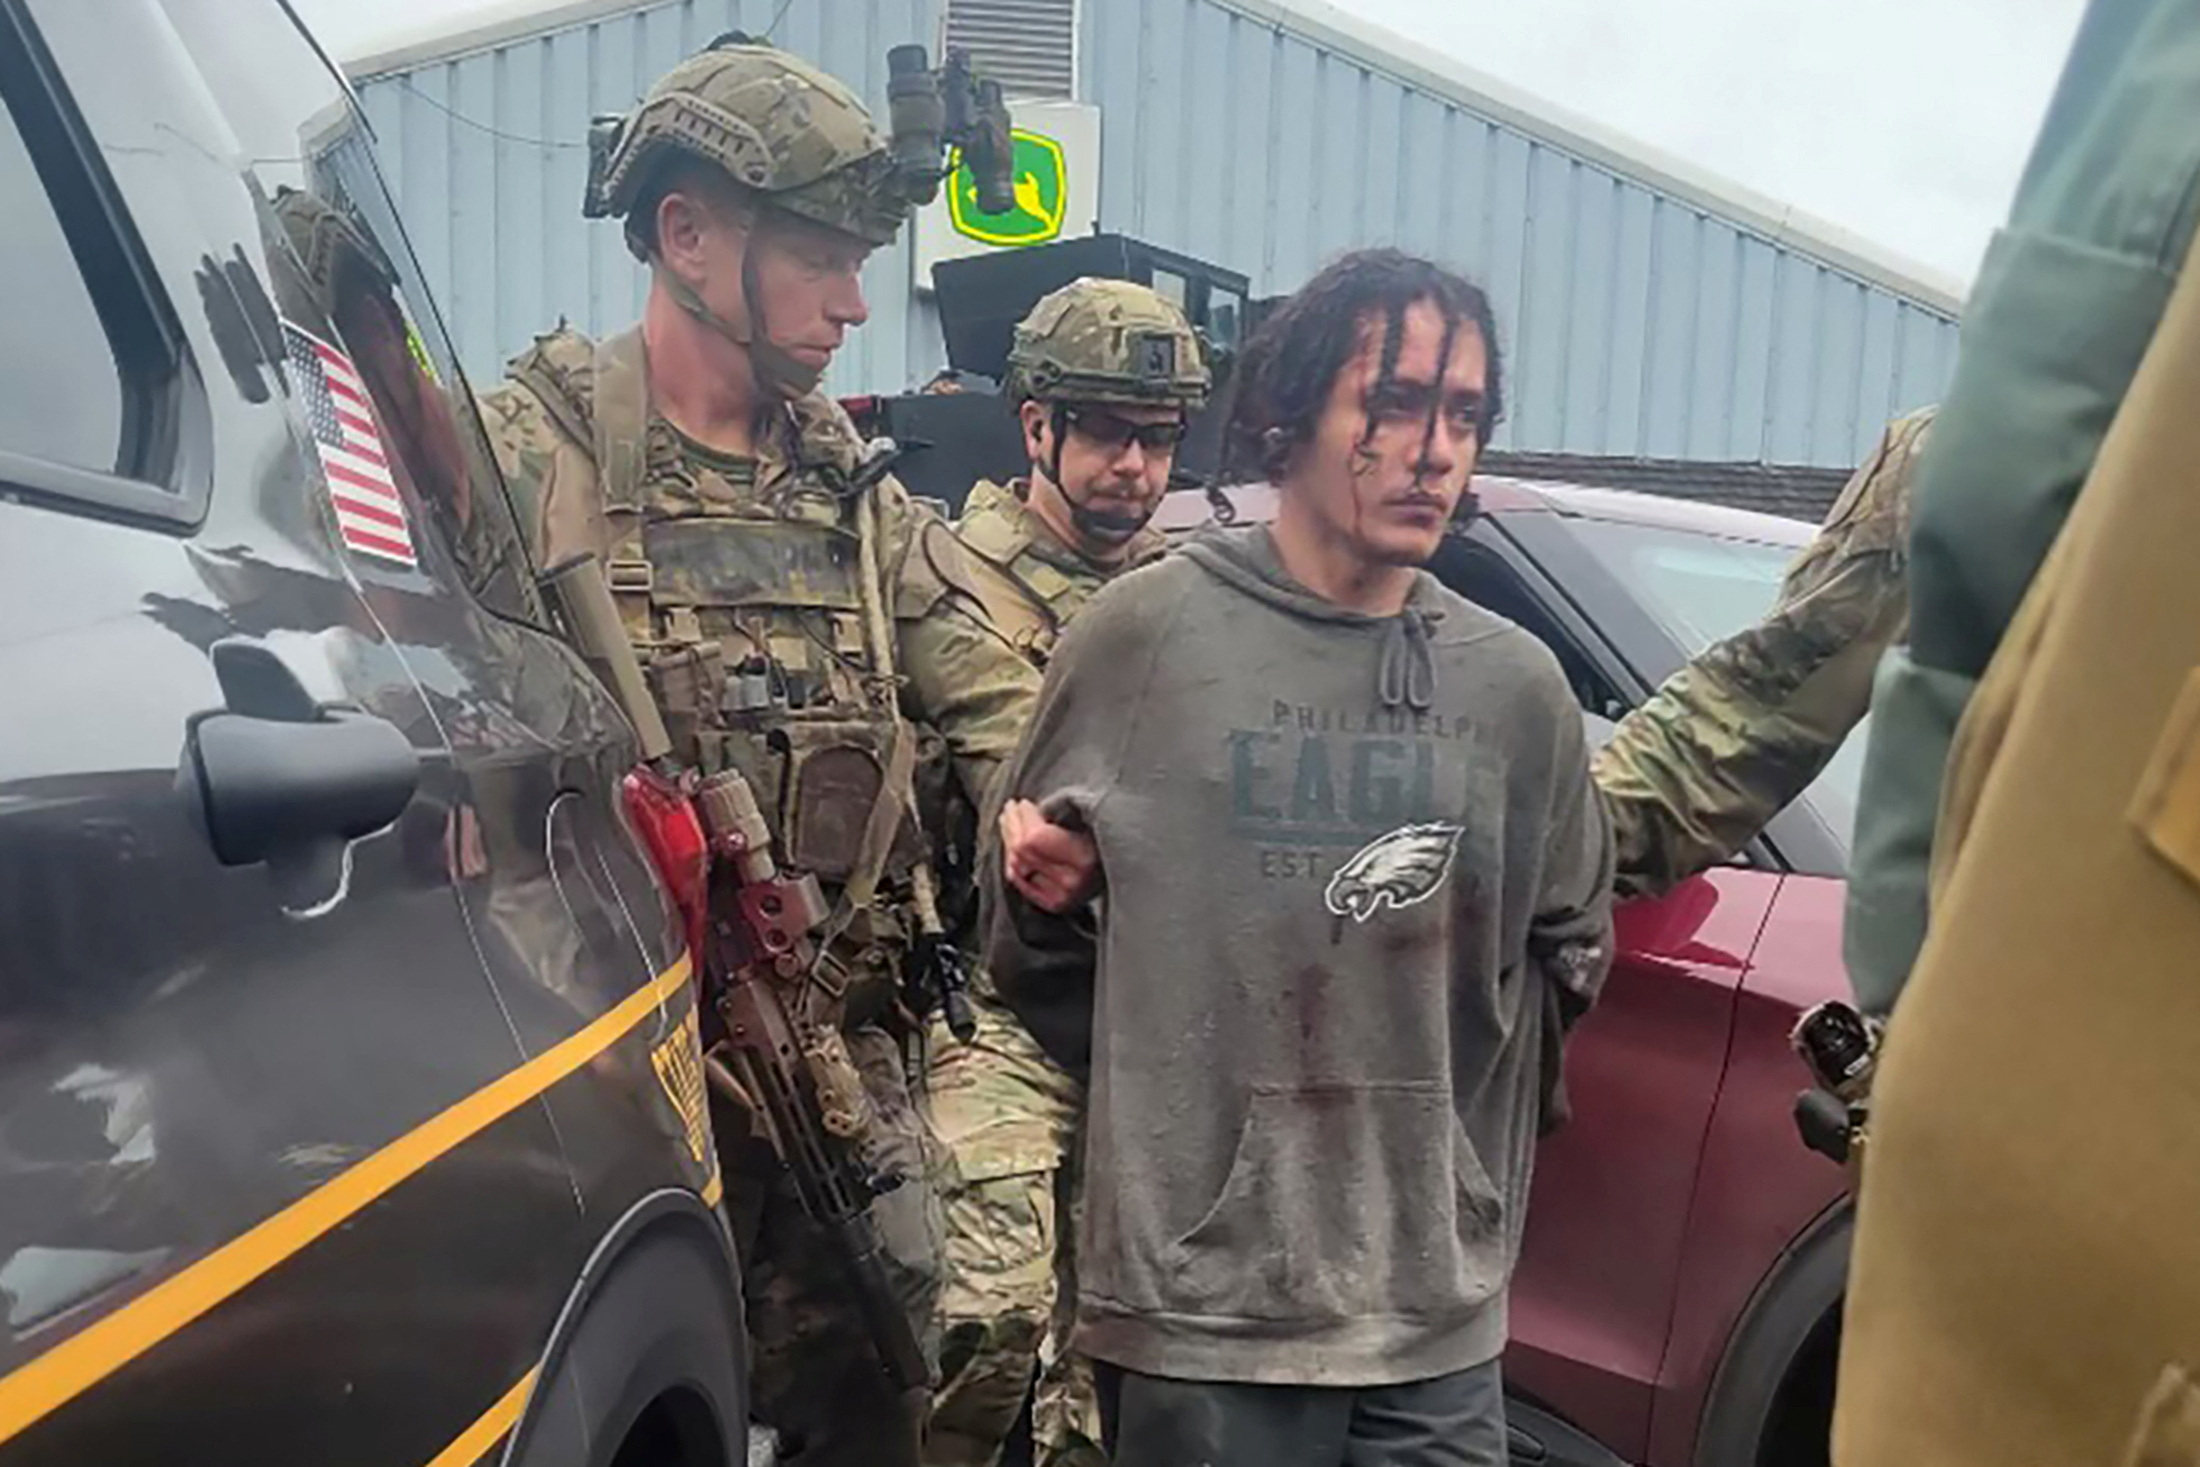 Escaped fugitive Danelo Cavalcante is taken into custody by law enforcement officers in Pennsylvania. Photo: Pennsylvania State Police/Handout via Reuters